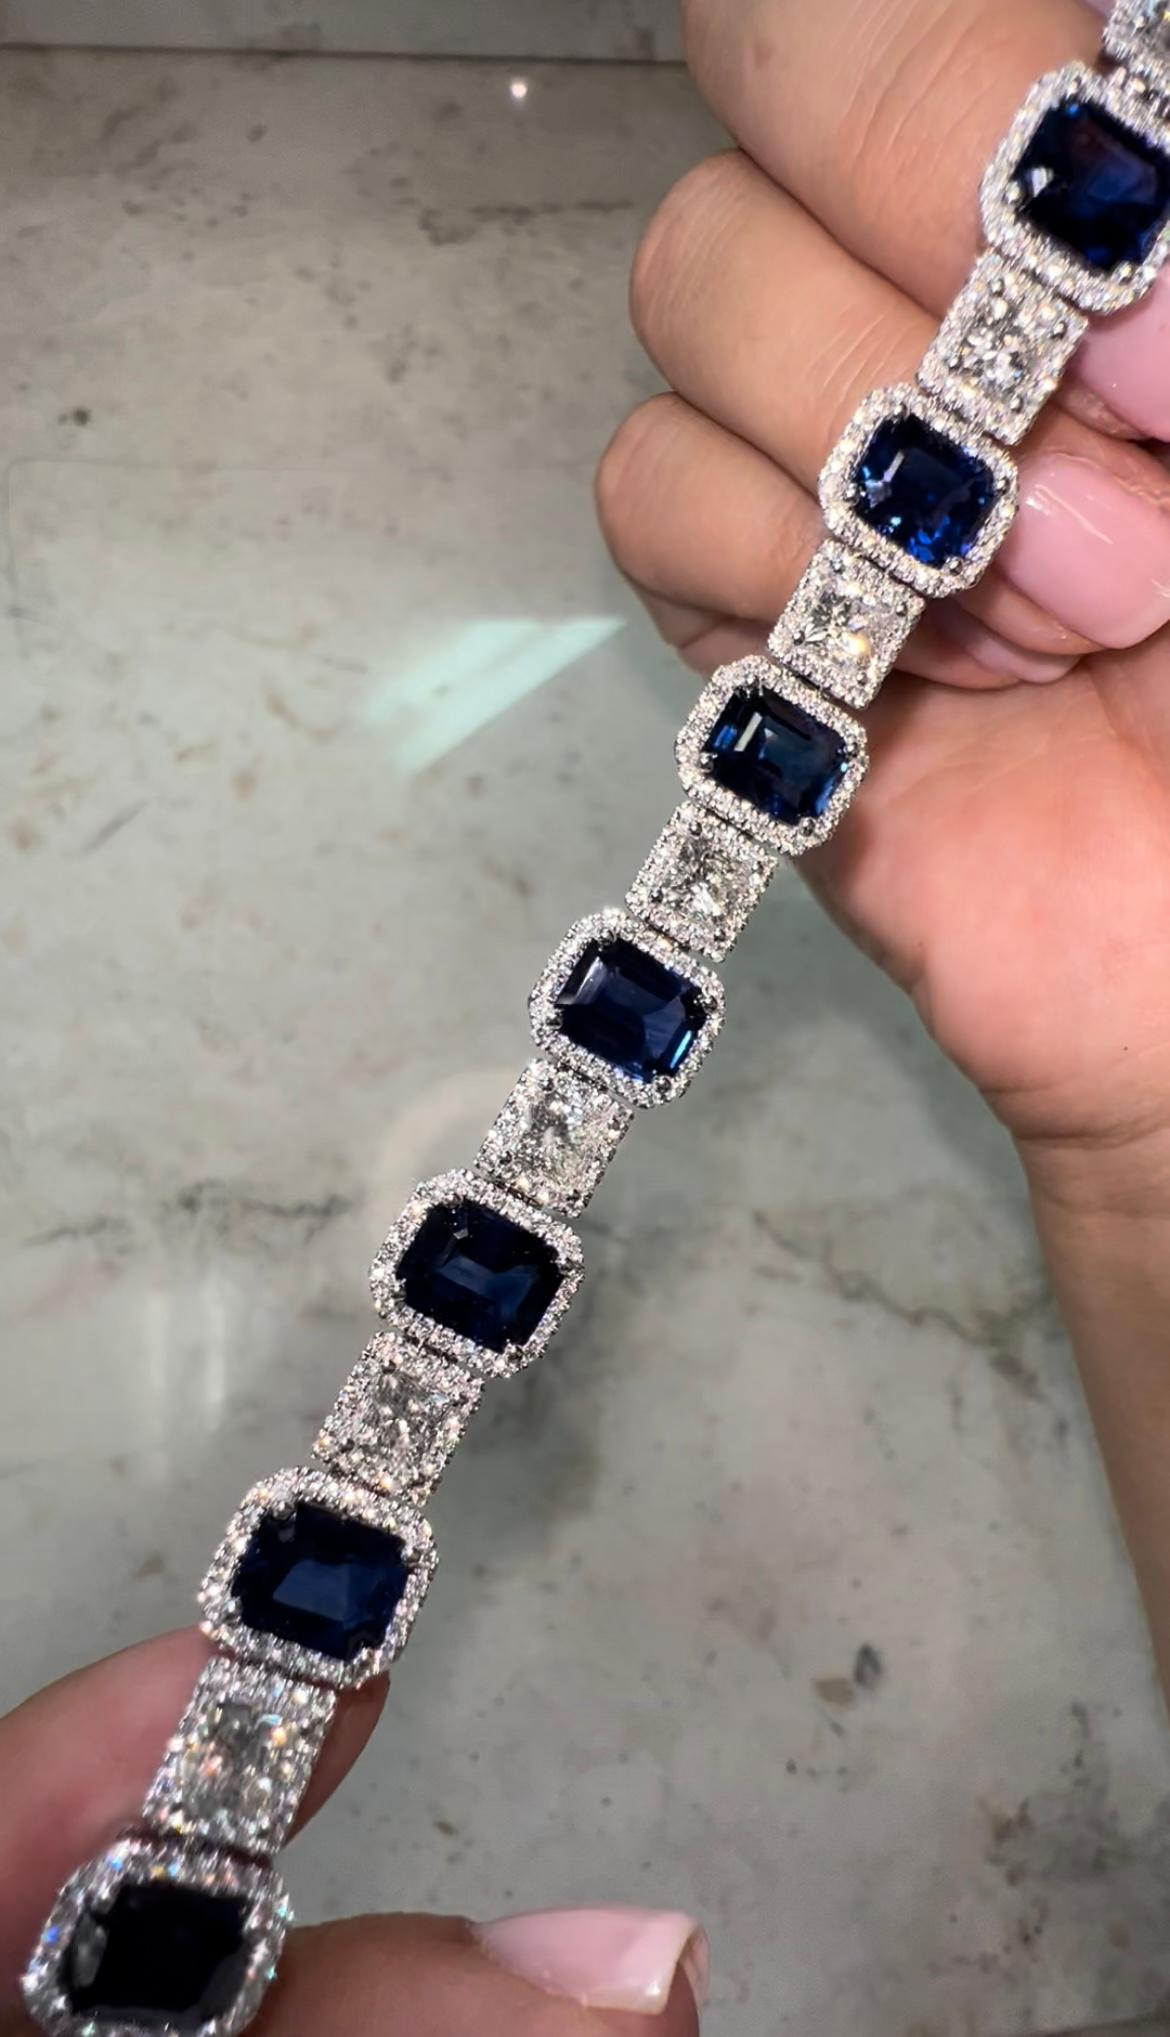 18K White Gold
20.79ct Total Blue Sapphire 
8.4ct Total Diamond
Designed, Handpicked, & Manufactured From Scratch In Los Angeles Using Only The Finest Materials and Workmanship